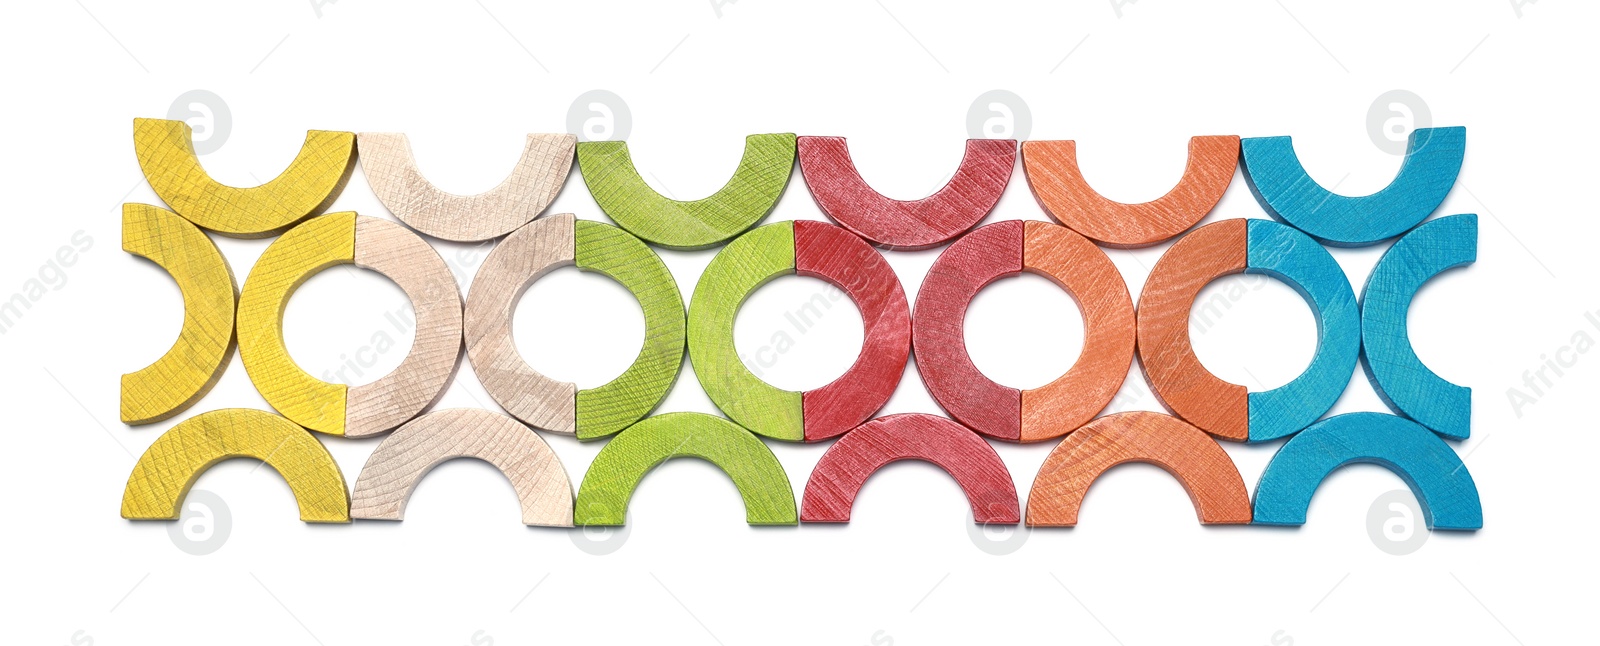 Photo of Colorful wooden pieces of play set isolated on white, top view. Educational toy for motor skills development